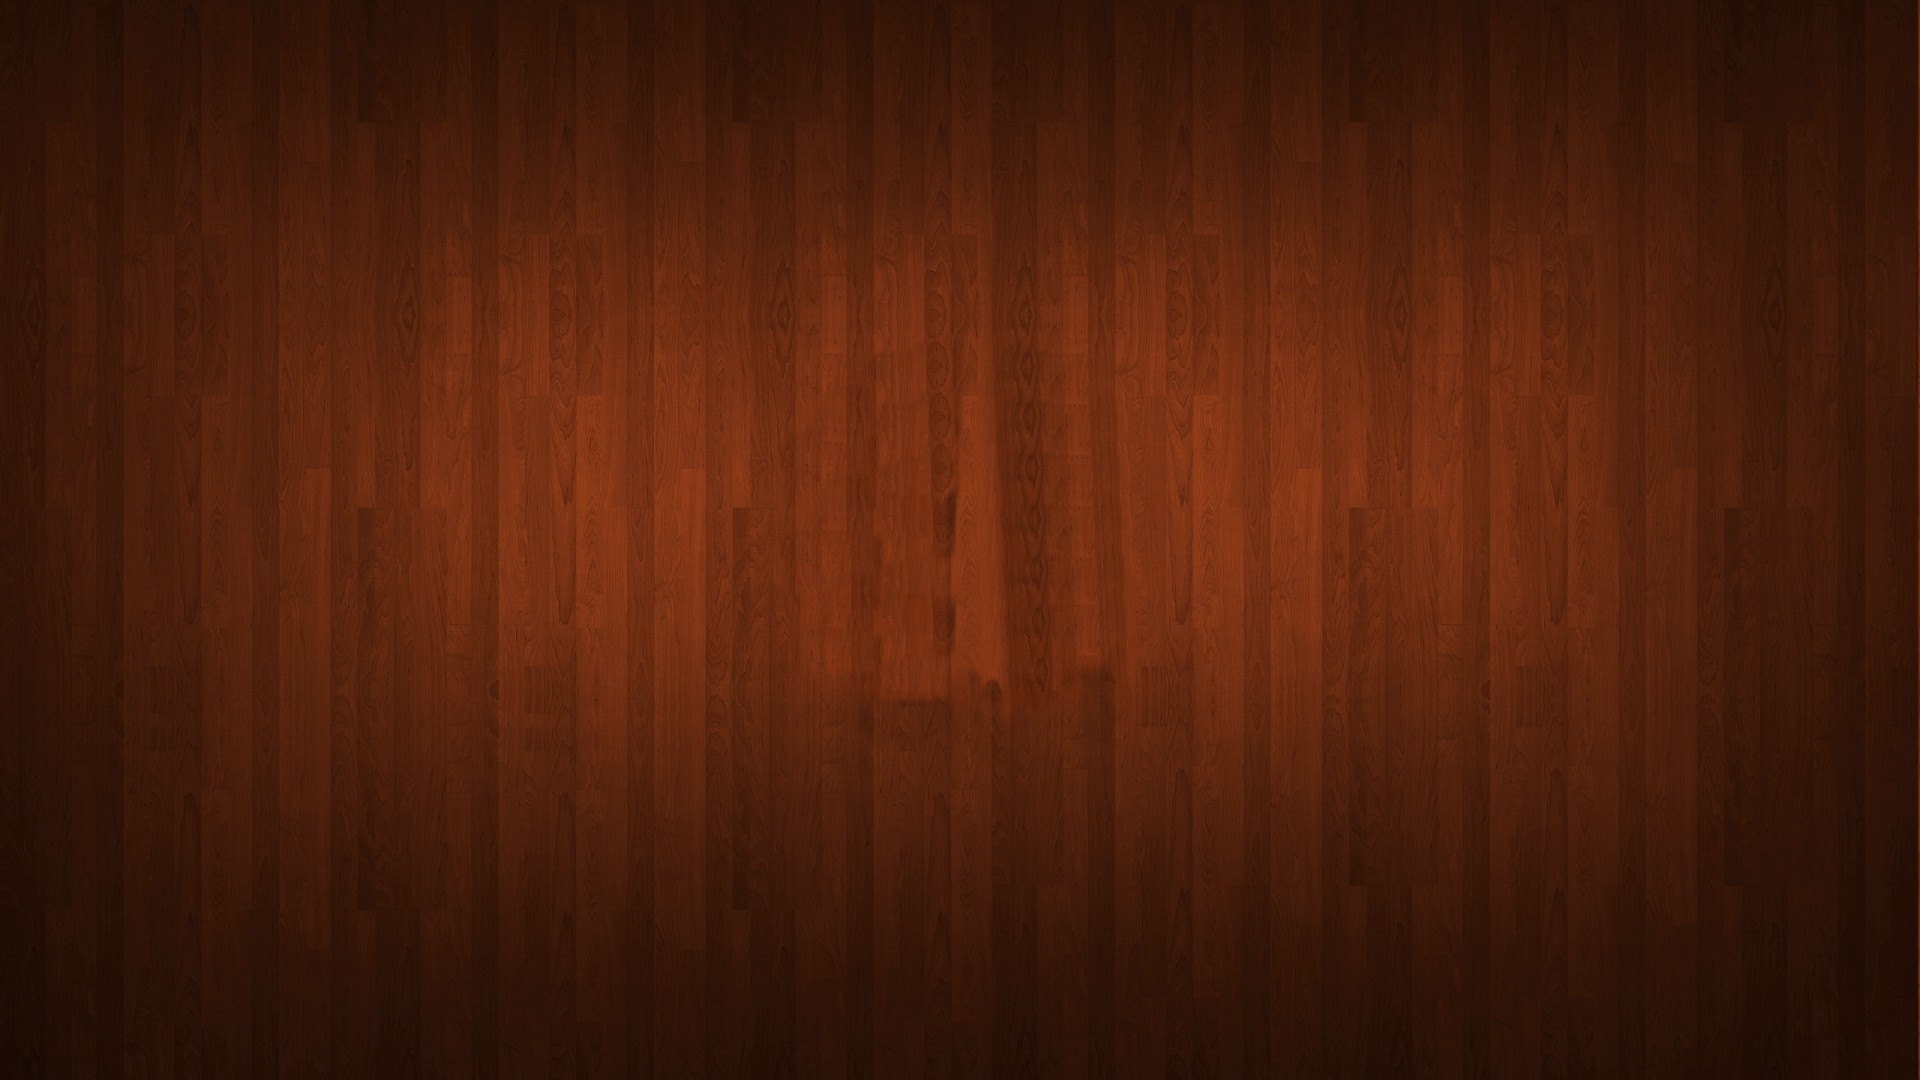 1920x1080 Get the latest wooden, solid, dark news, pictures and videos and learn all  about wooden, solid, dark from wallpapers4u.org, your wallpaper news source.